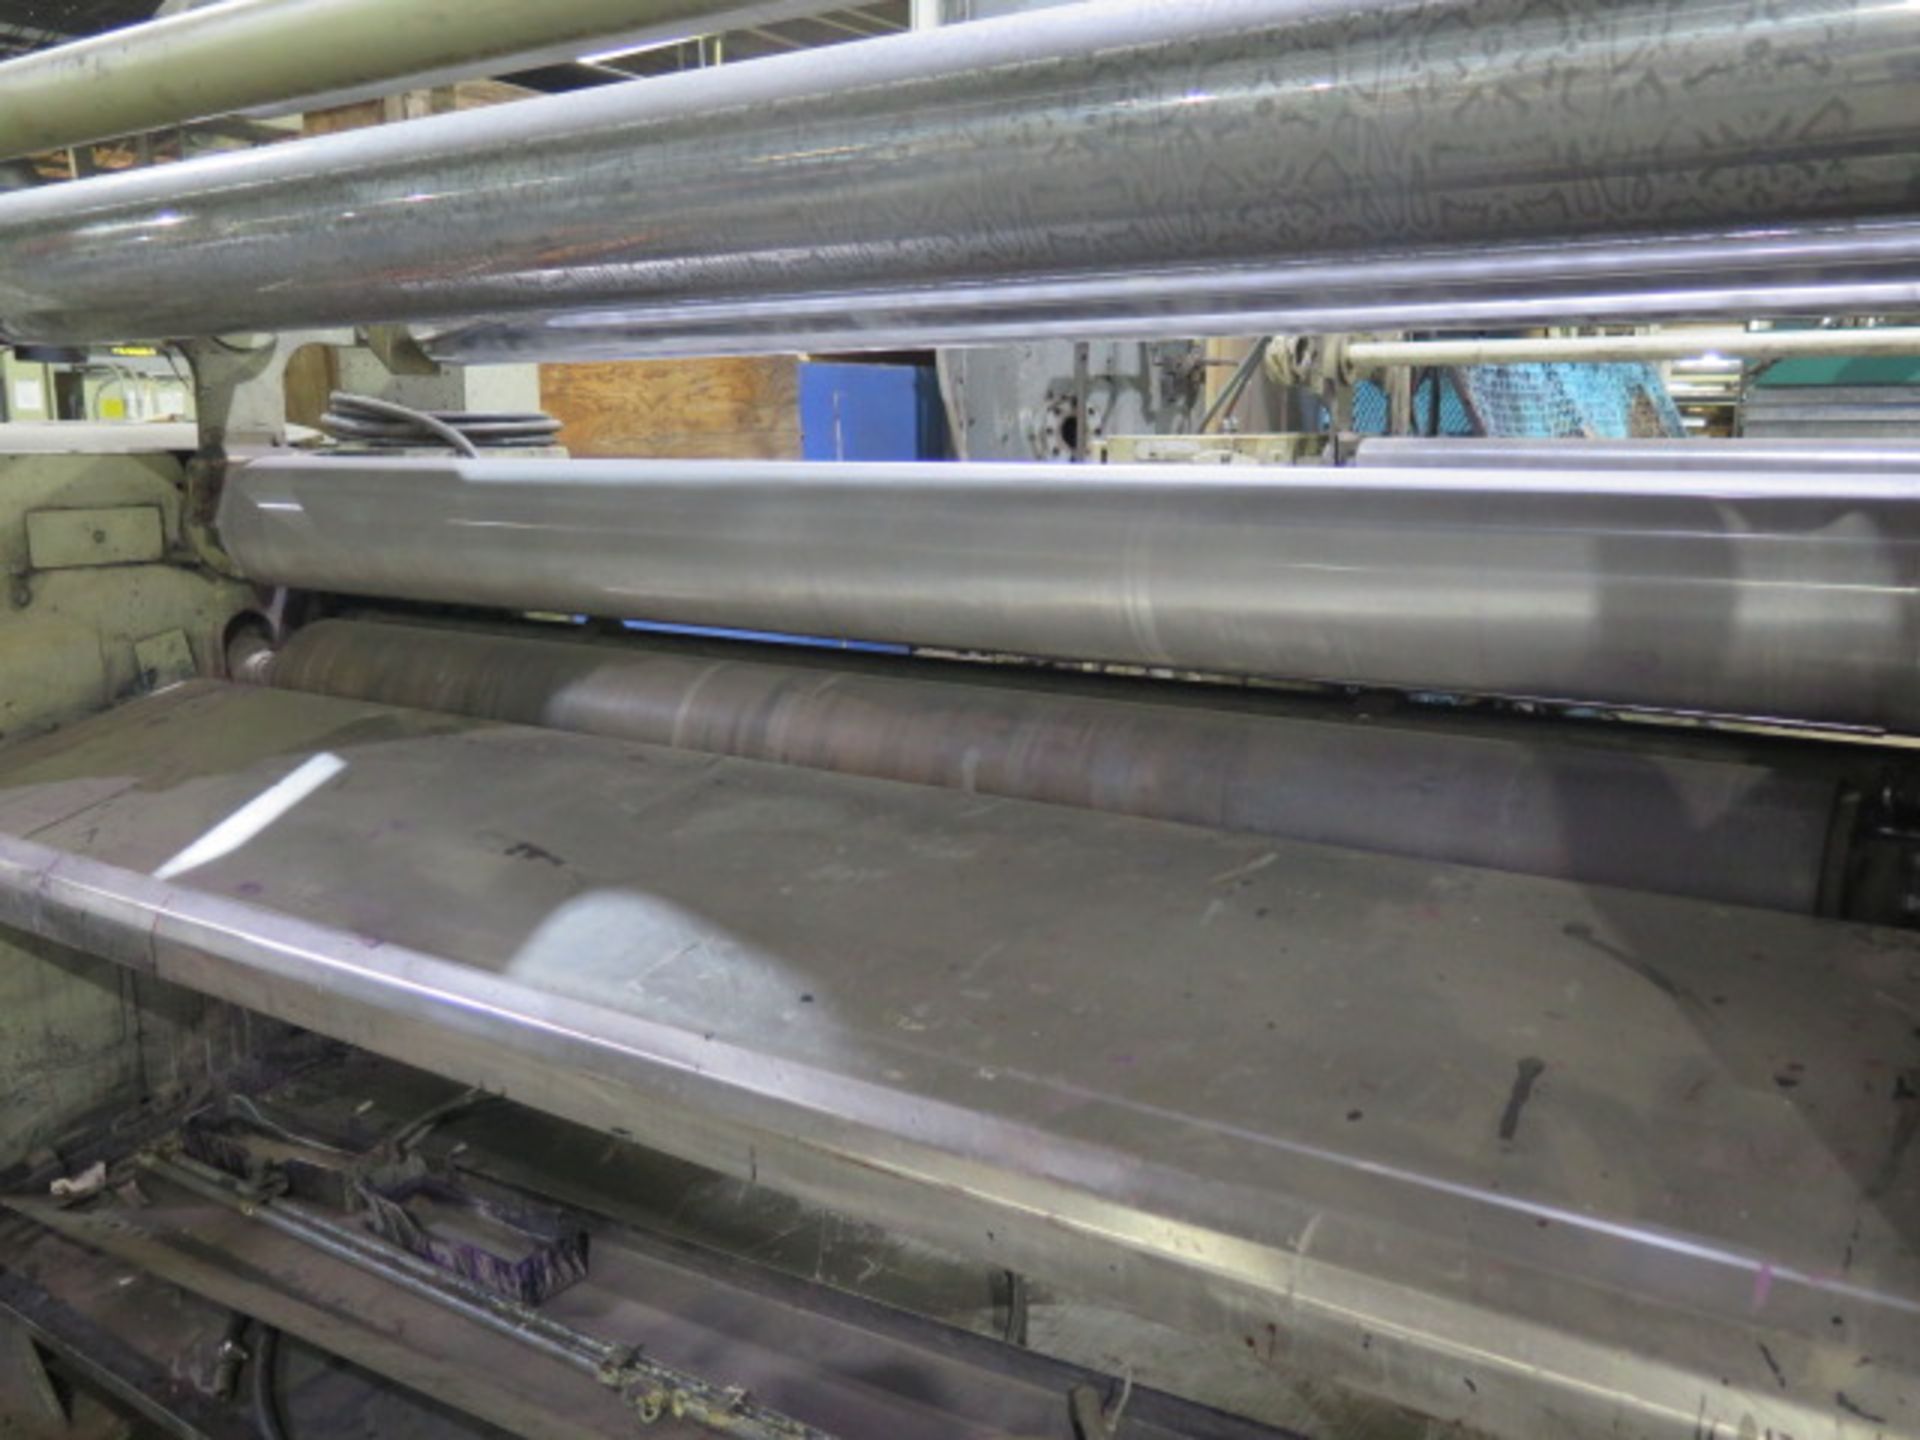 1997 Gemata “Rotoprint” 1800/4 75” Roller Coating Machine s/n 972046 (SOLD AS-IS - NO WARRANTY) - Image 8 of 14